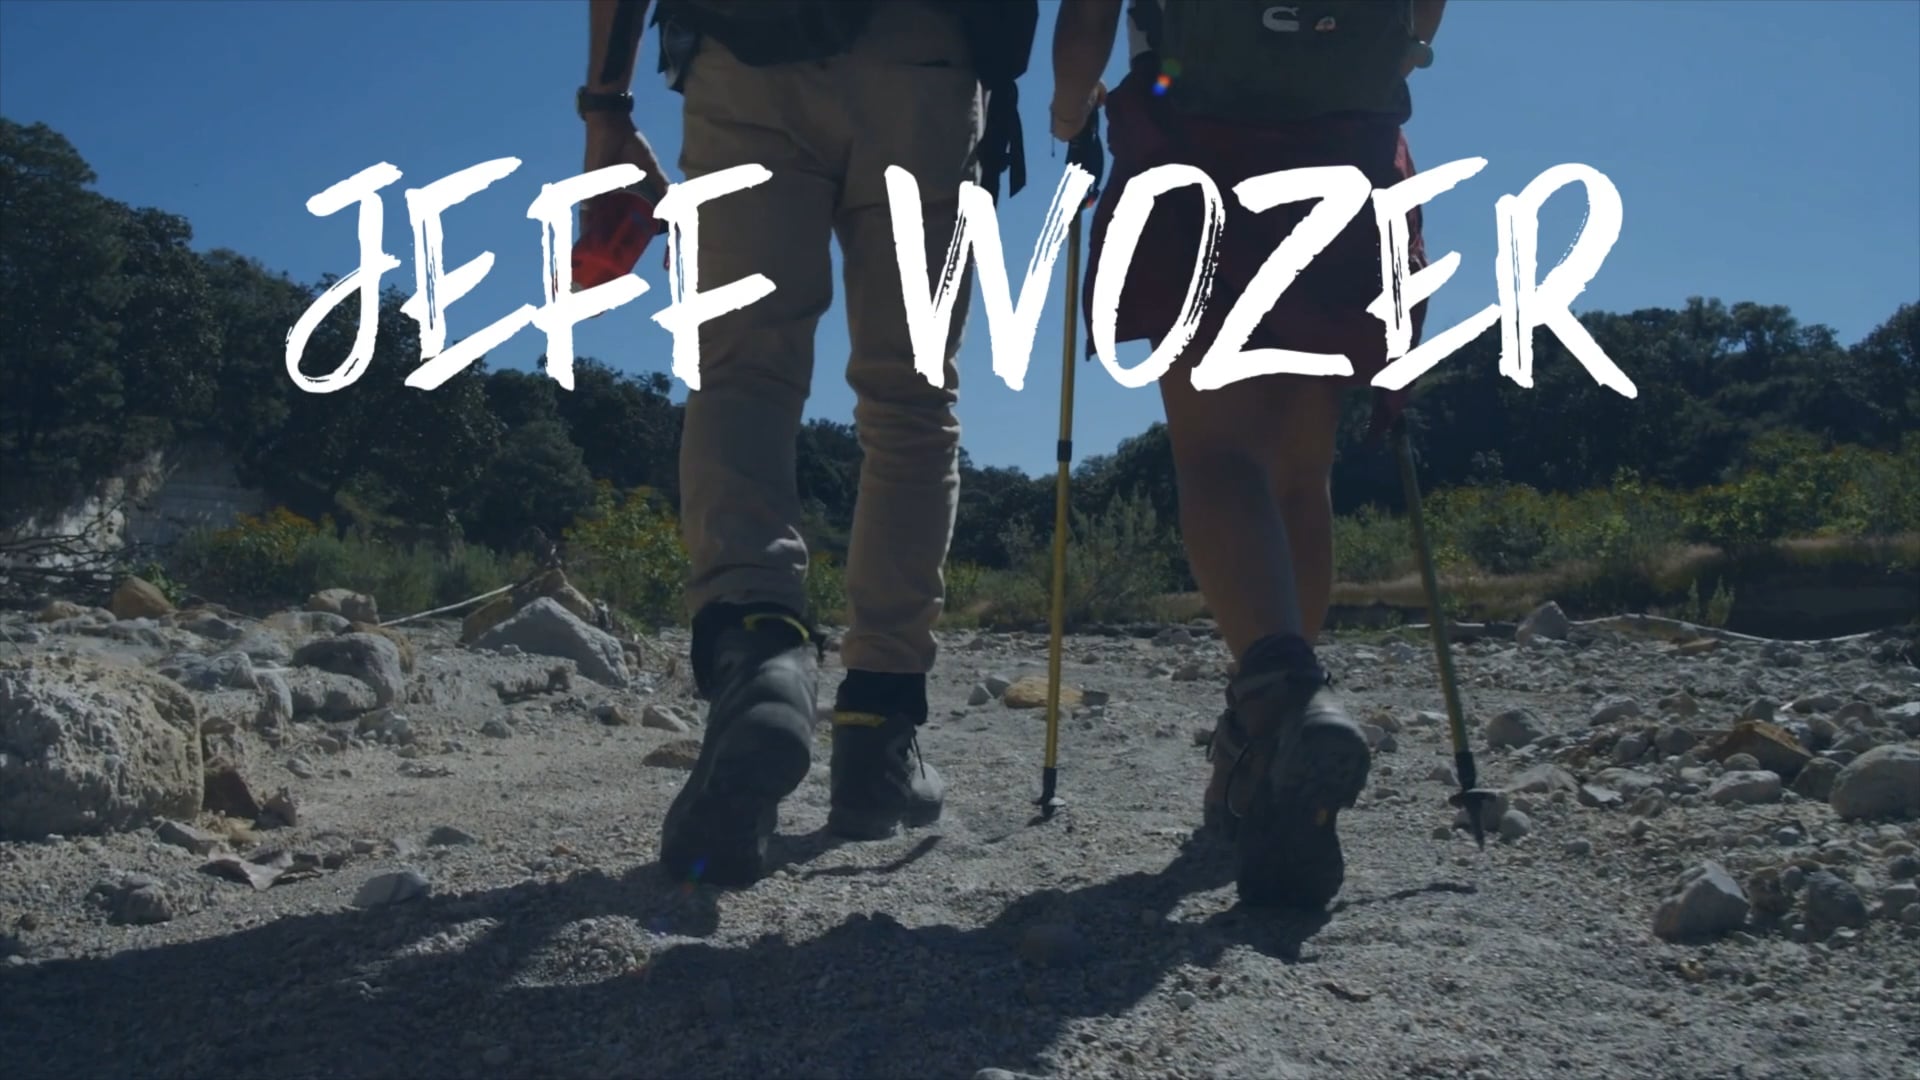 Promotional video thumbnail 1 for Jeff Wozer